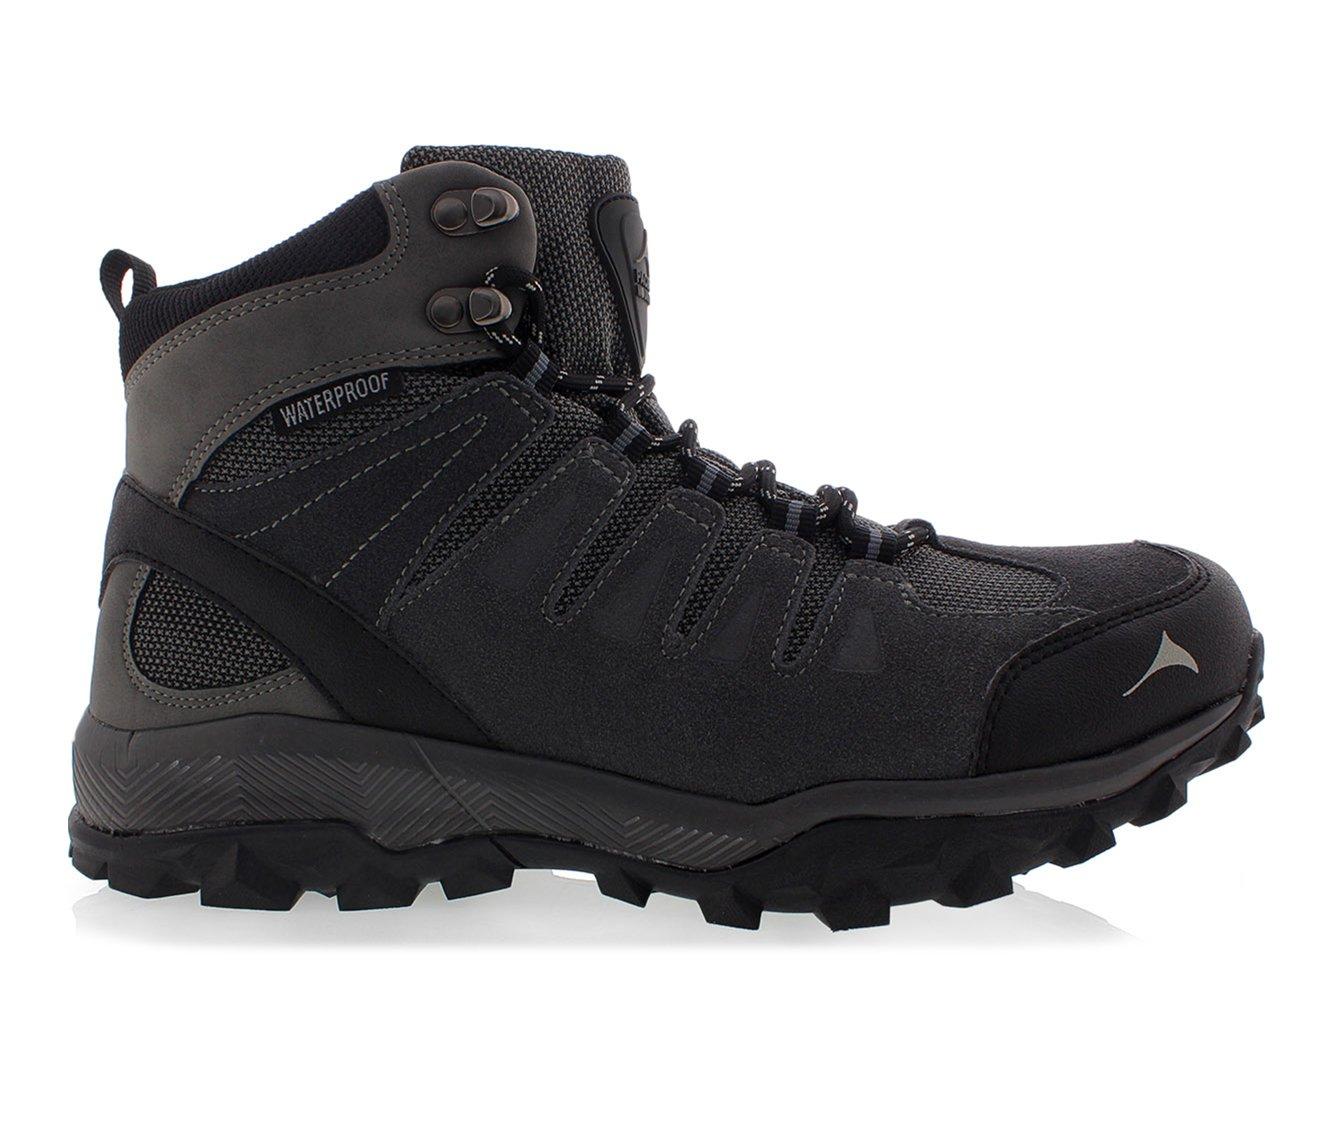 Men's Pacific Mountain Boulder's Mid Hiking Boots